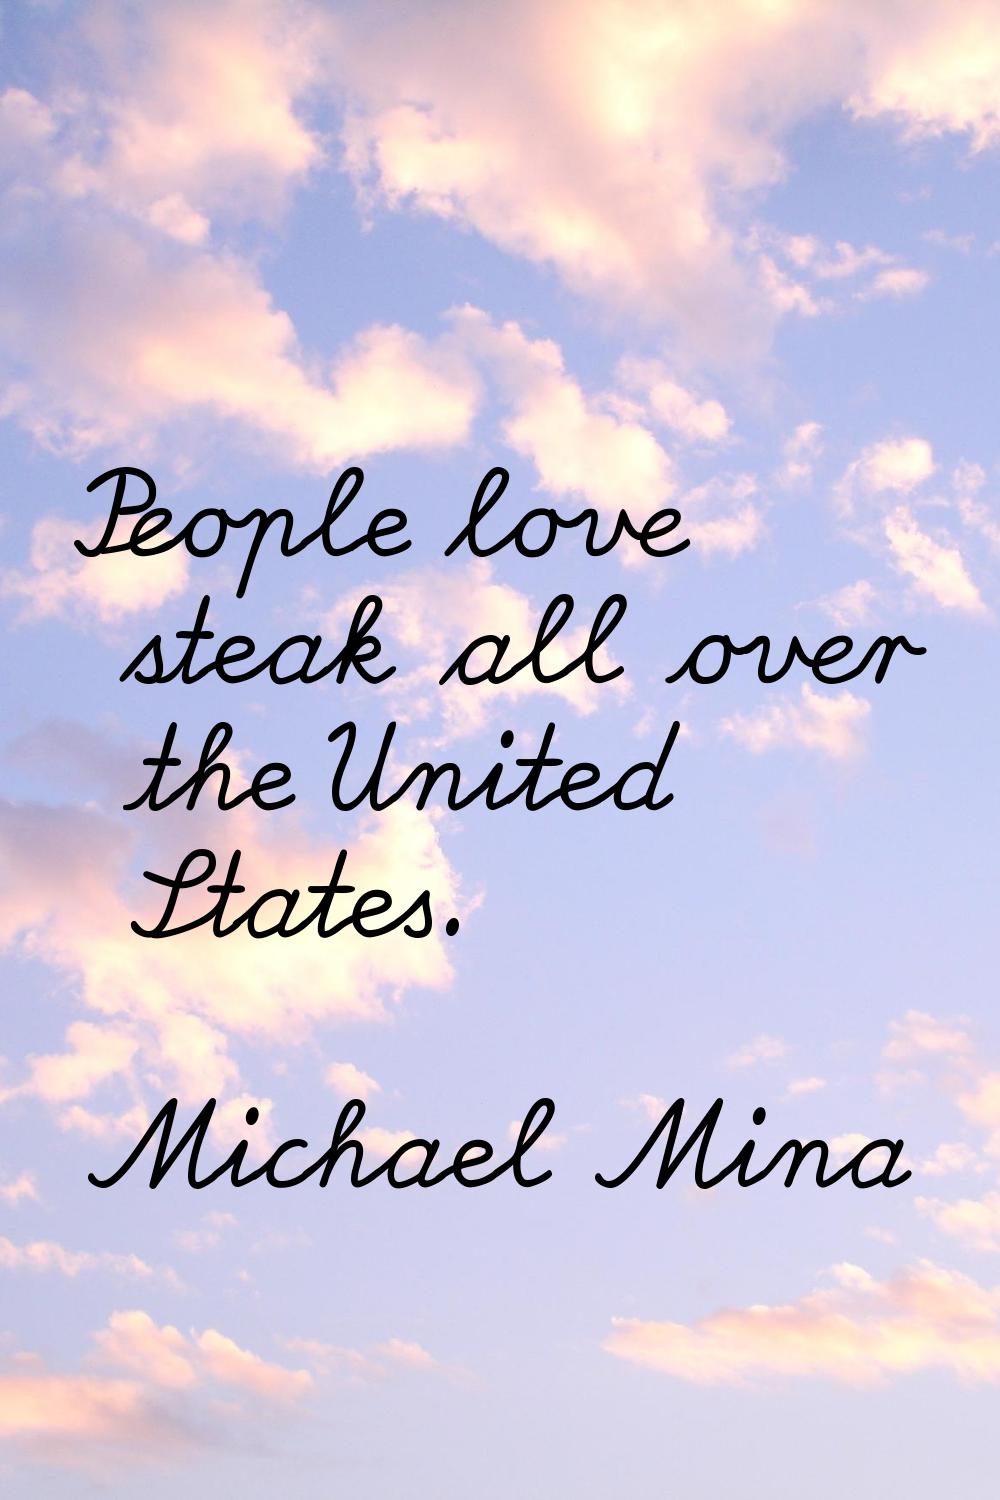 People love steak all over the United States.